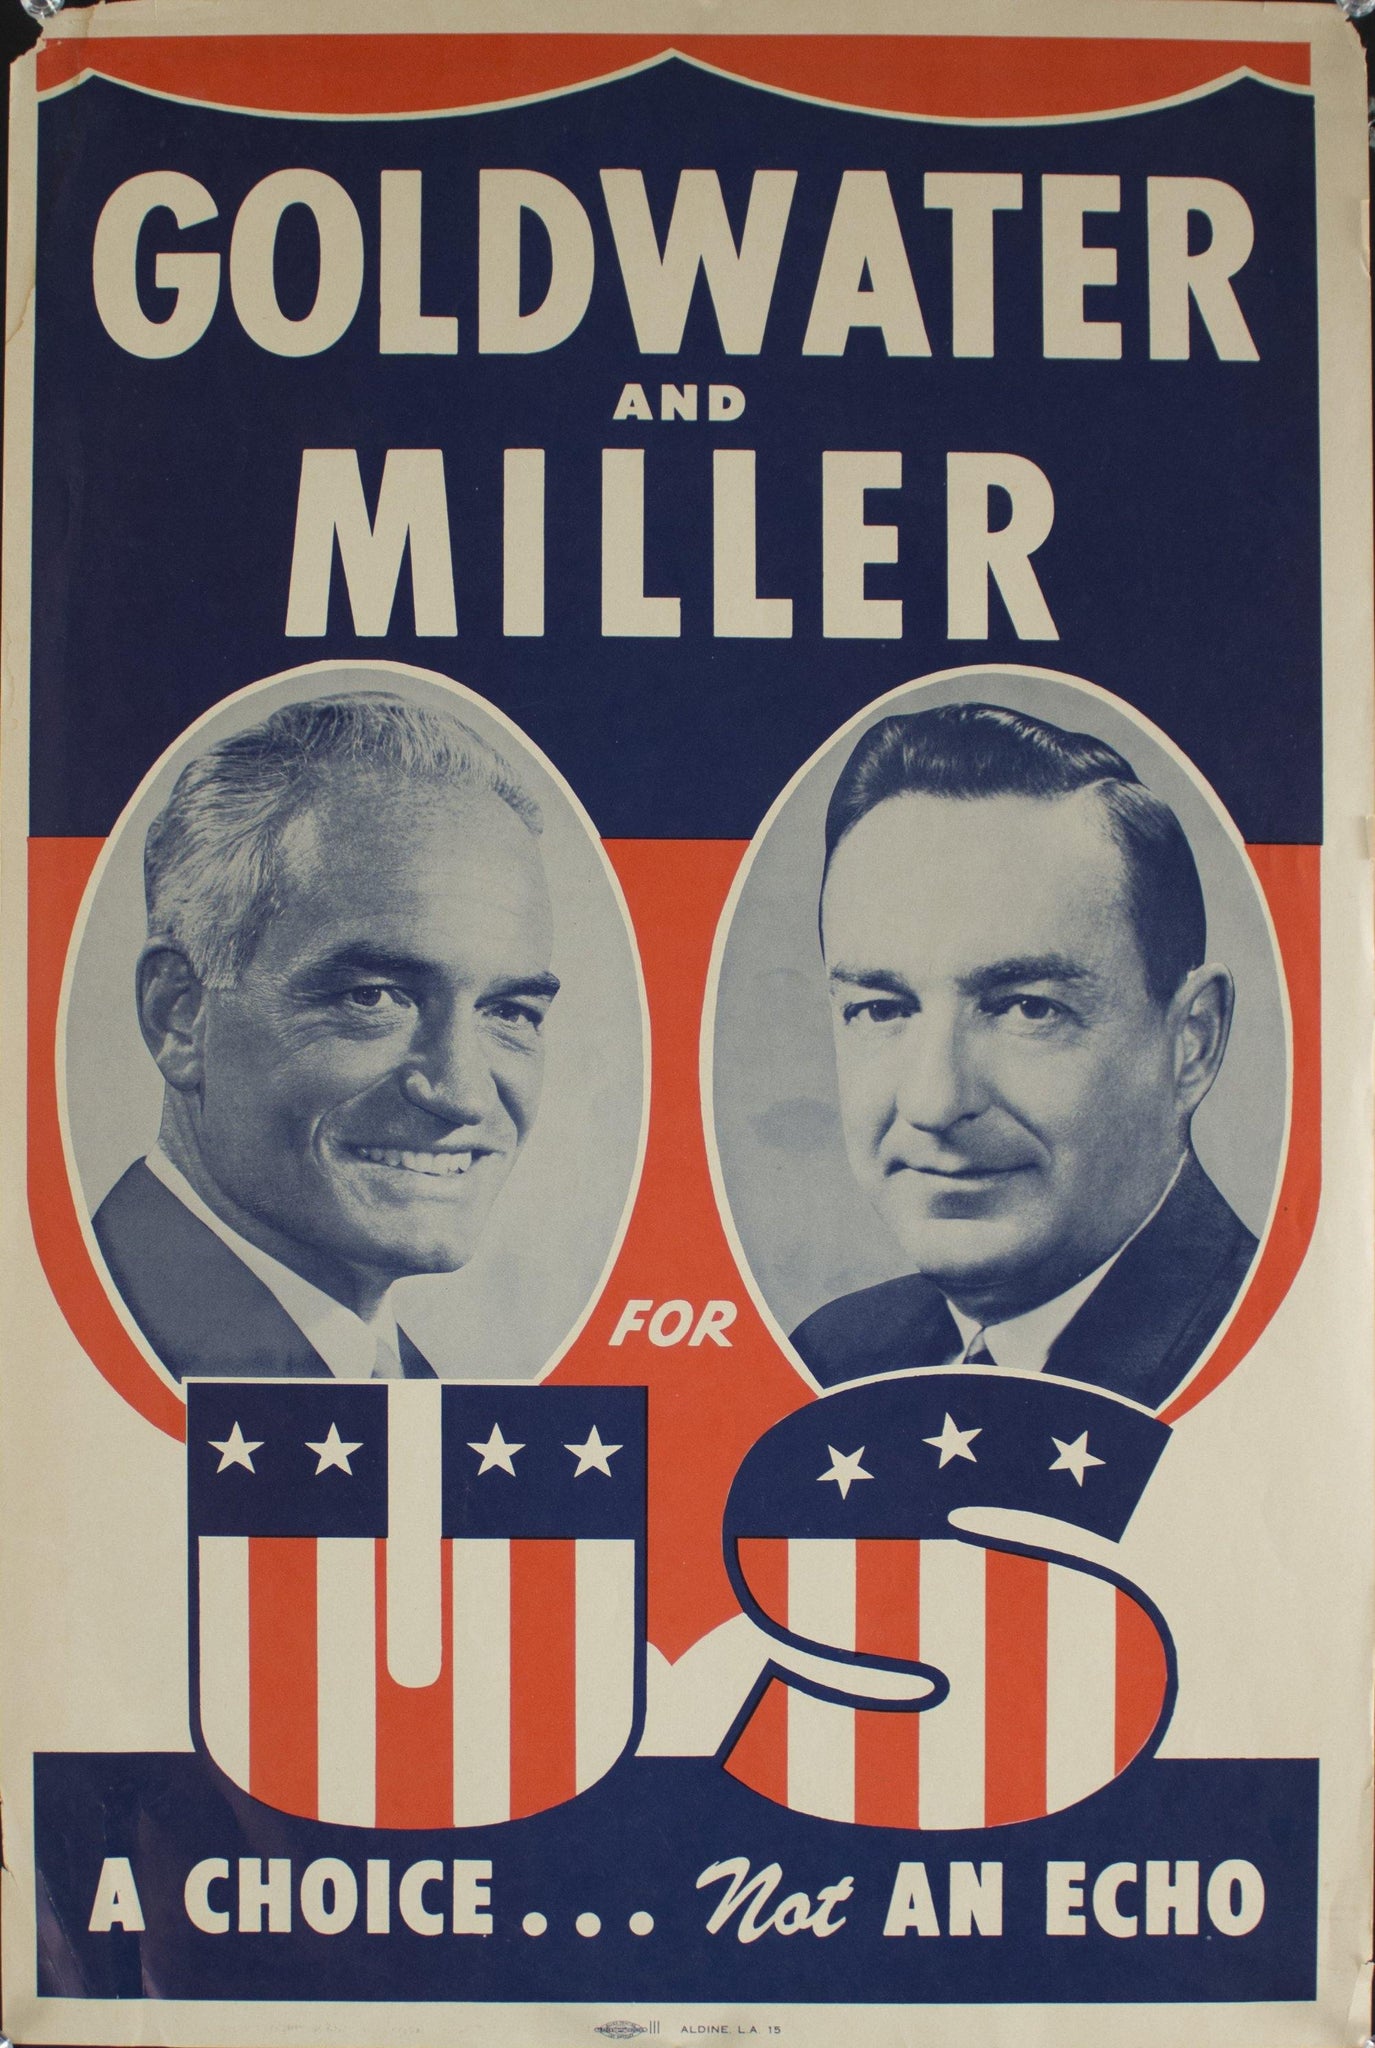 1968 Goldwater and Miller for US | A Choice…Not an Echo - Golden Age Posters